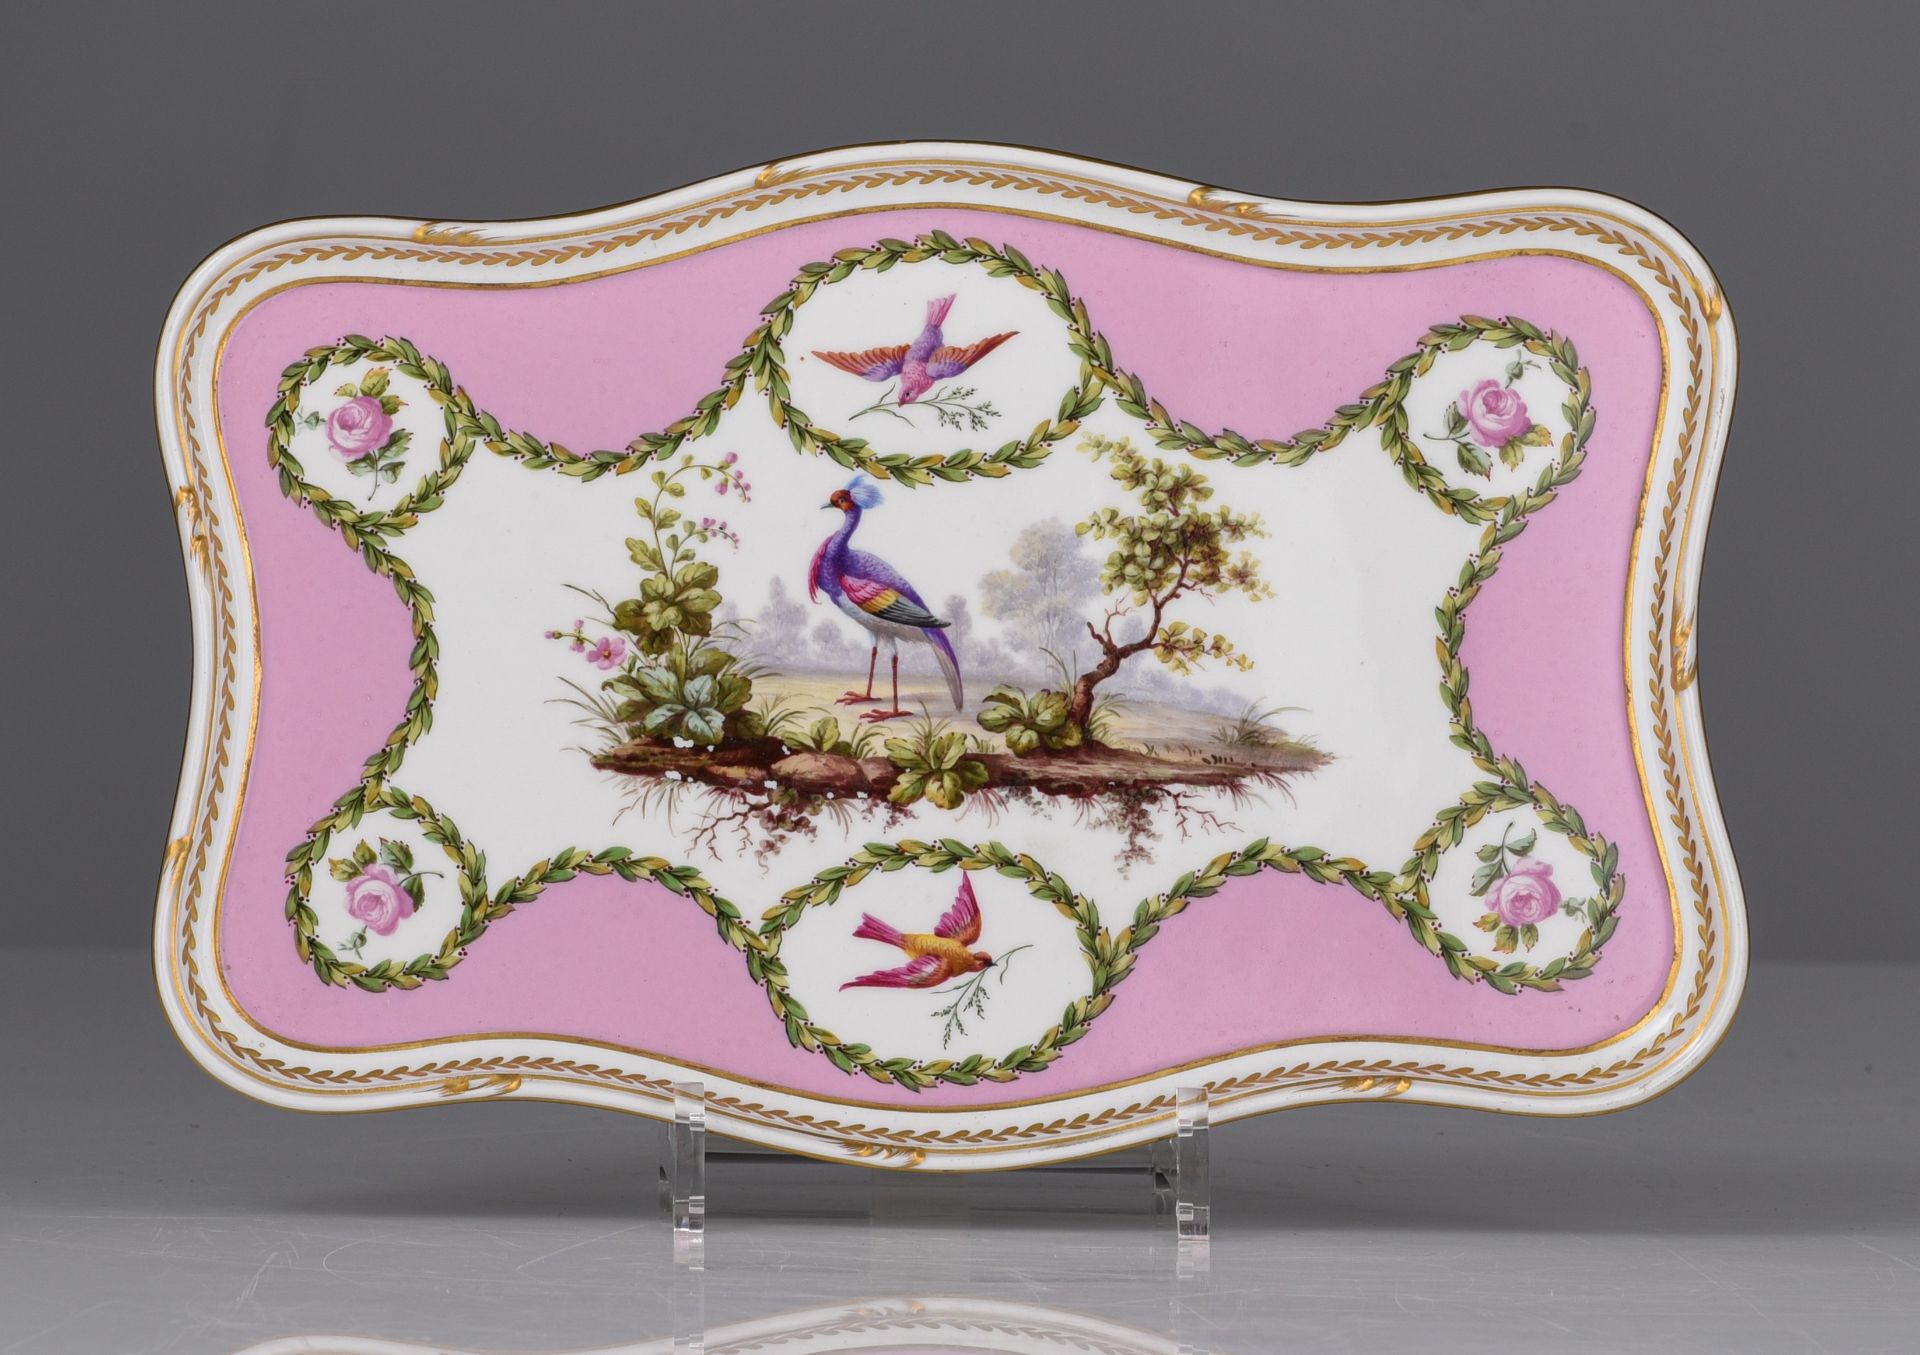 (BIDDING ONLY ON CARLOBONTE.BE) A 12 person Sevres porcelain set of dessert cups on a matching tray, - Image 2 of 18